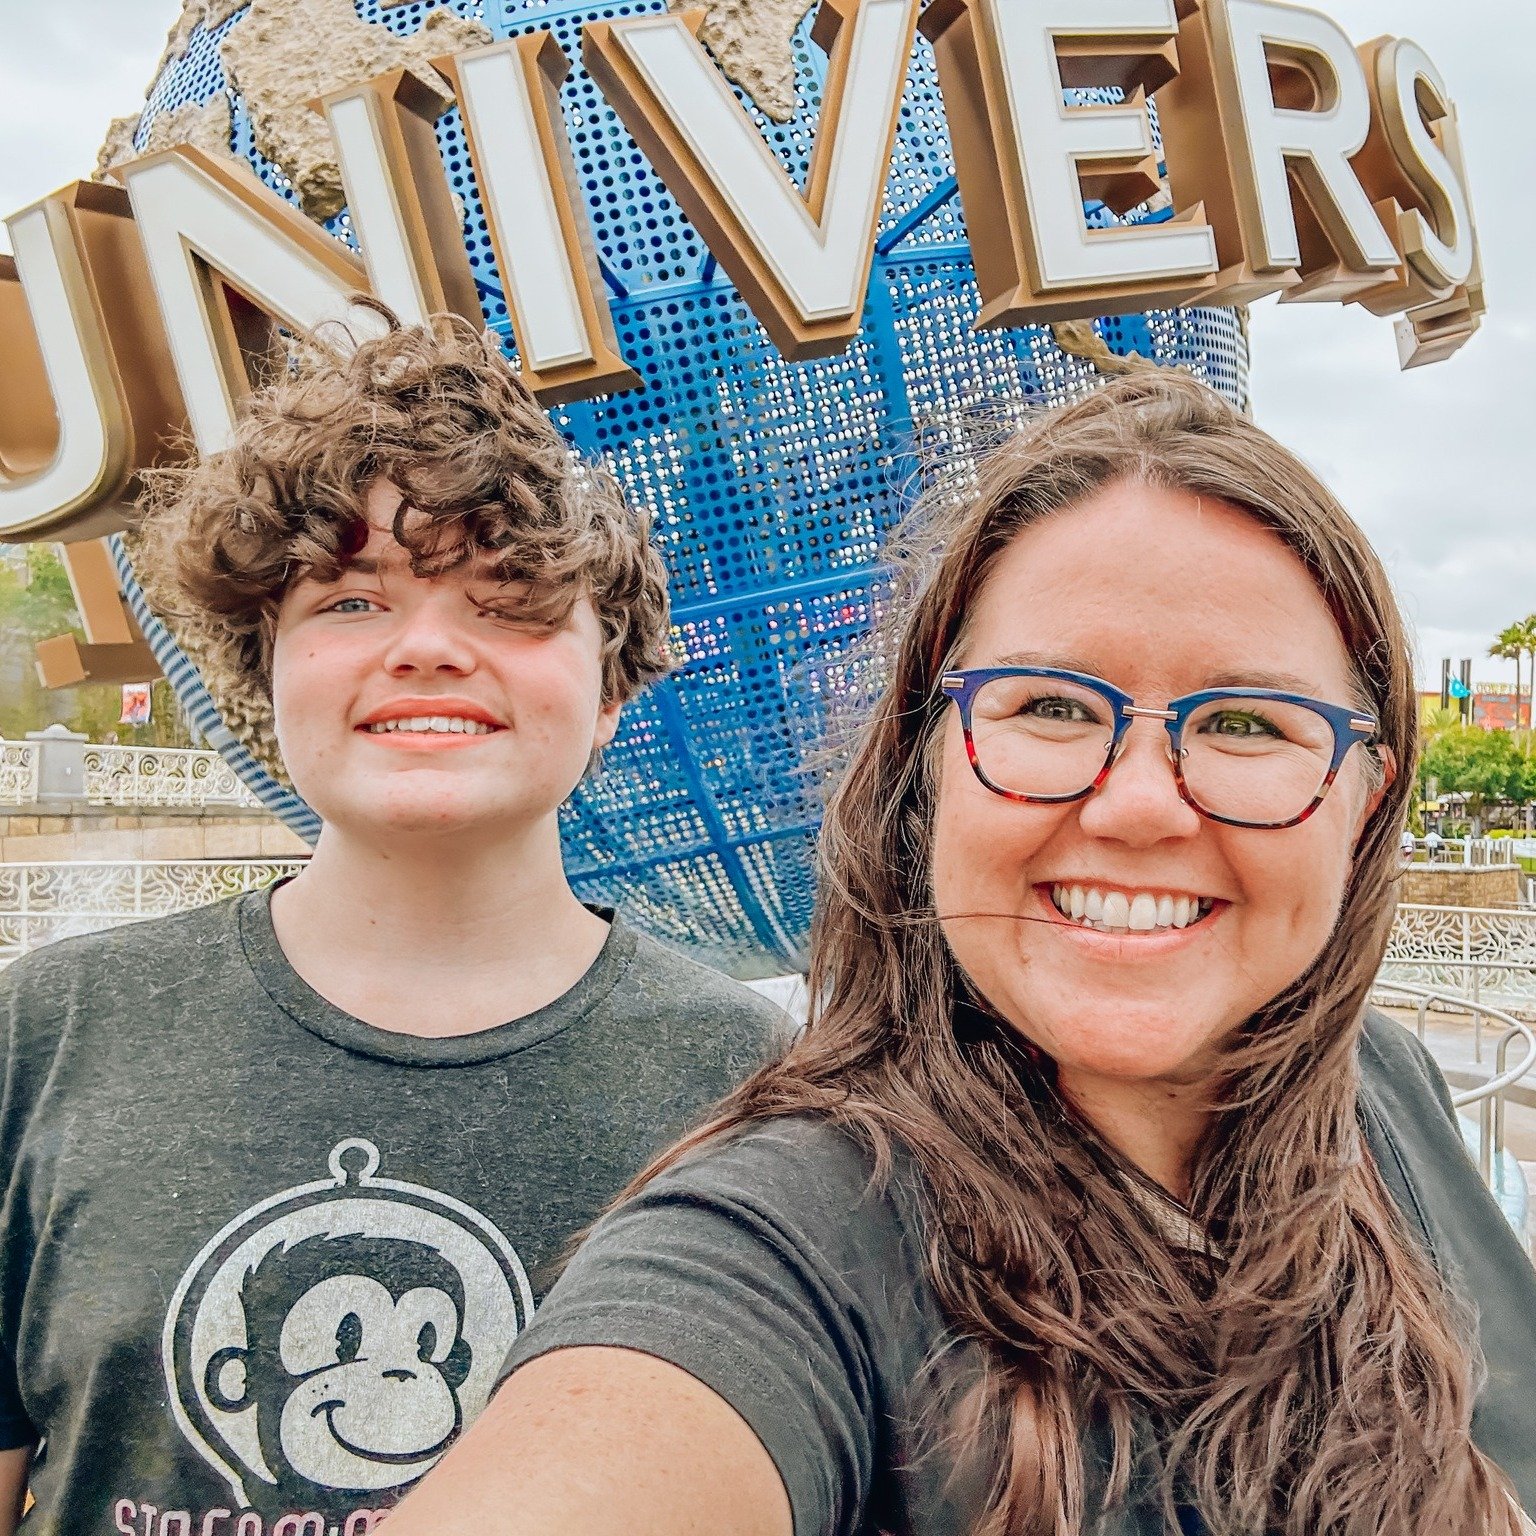 Cash and I made a fun trip to CityWalk today for a free travel advisor screening of Kung Fu Panda 4 (it was cute). While we were there, we couldn't resist grabbing some Auntie Anne's and an updated photo with the globe! 

➡️ For one of our first glob